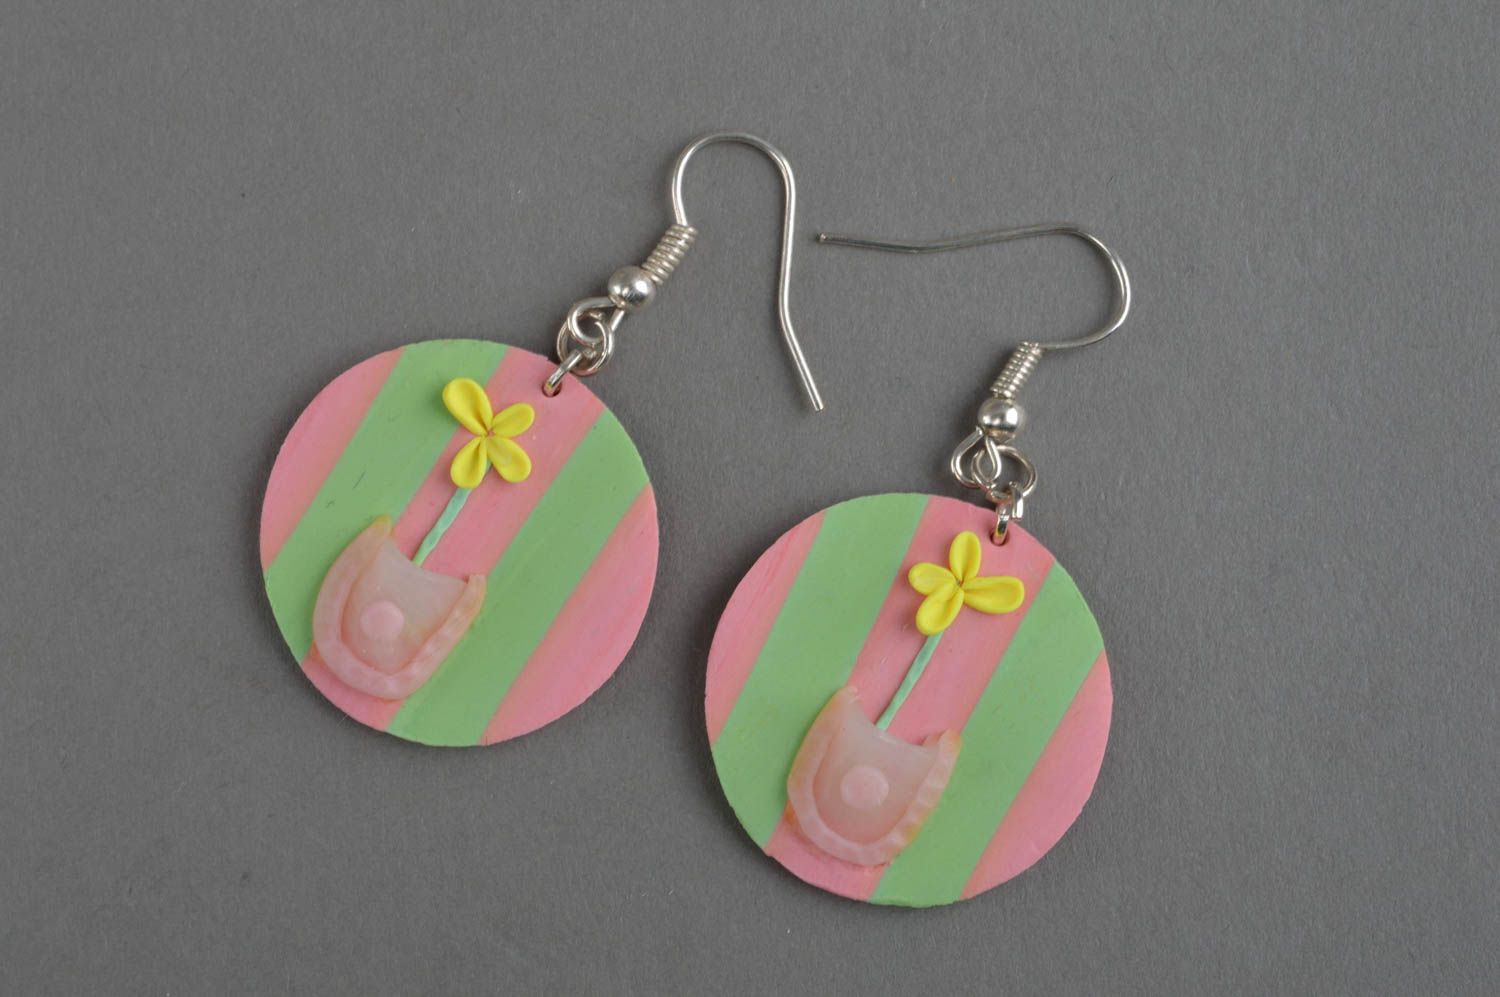 Colorful handmade round plastic earrings designer jewelry polymer clay ideas photo 2